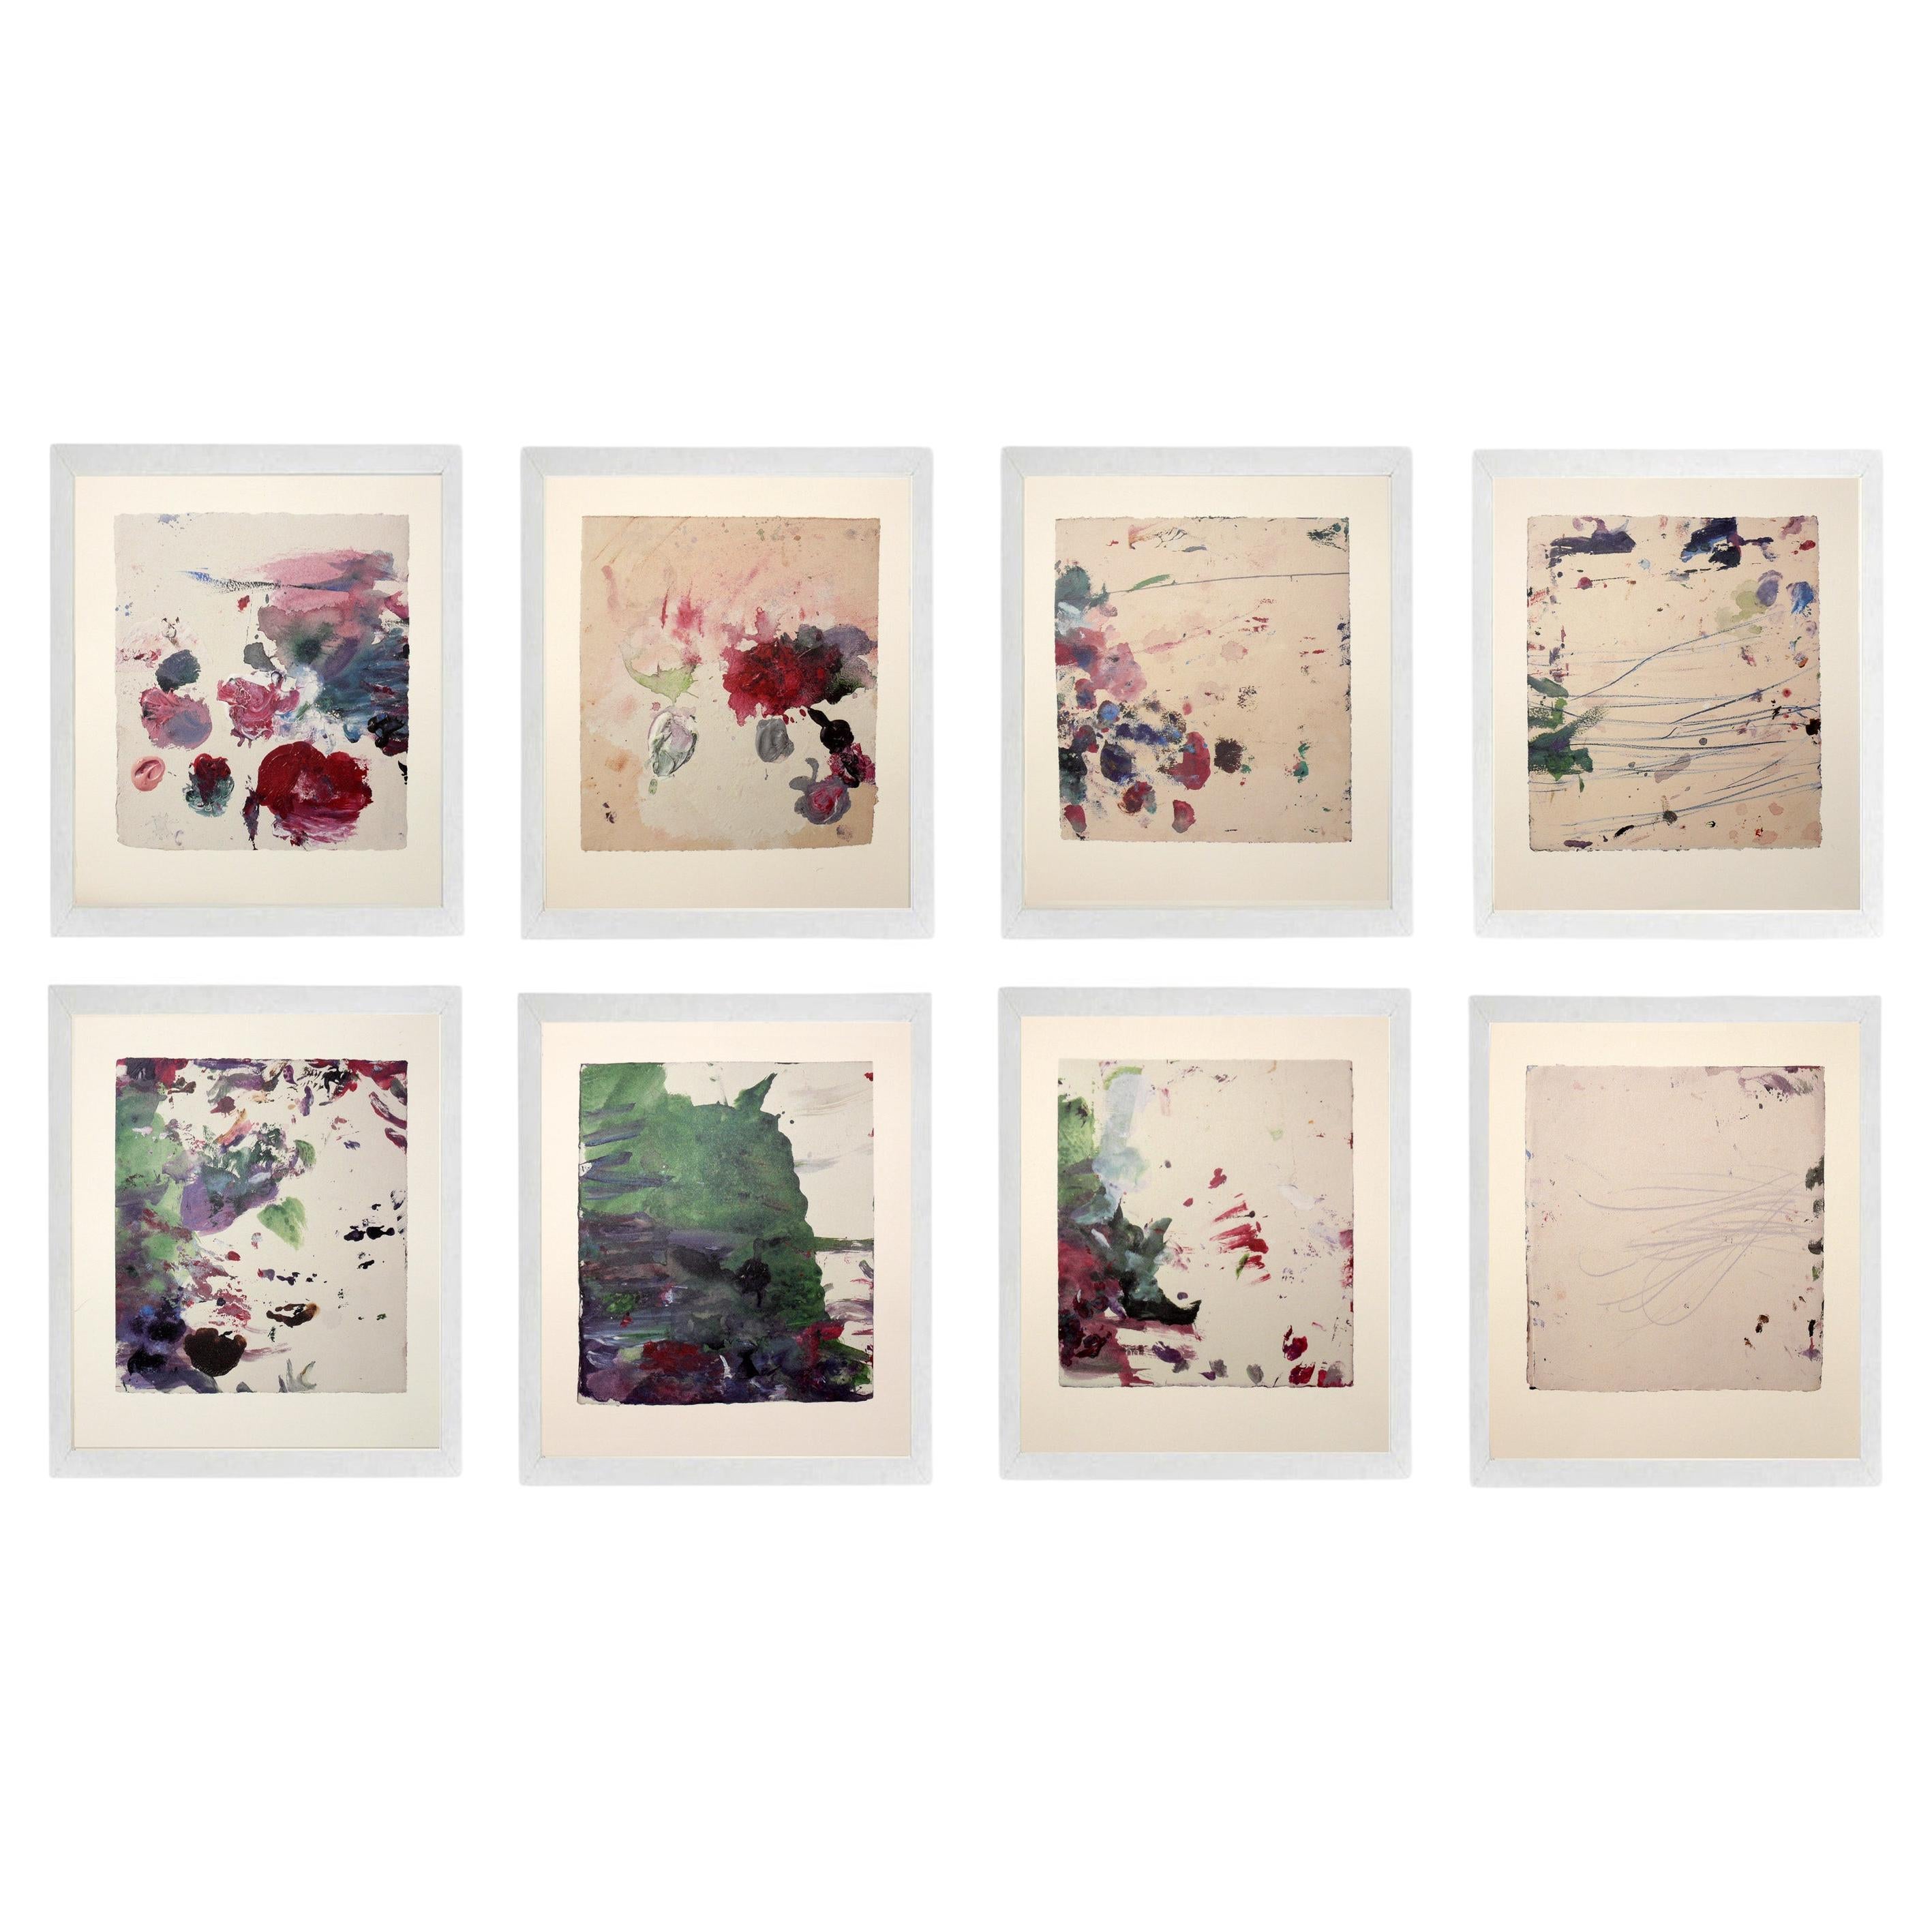 Cy Twombly Abstract Gaeta Lithographs Group of Eight